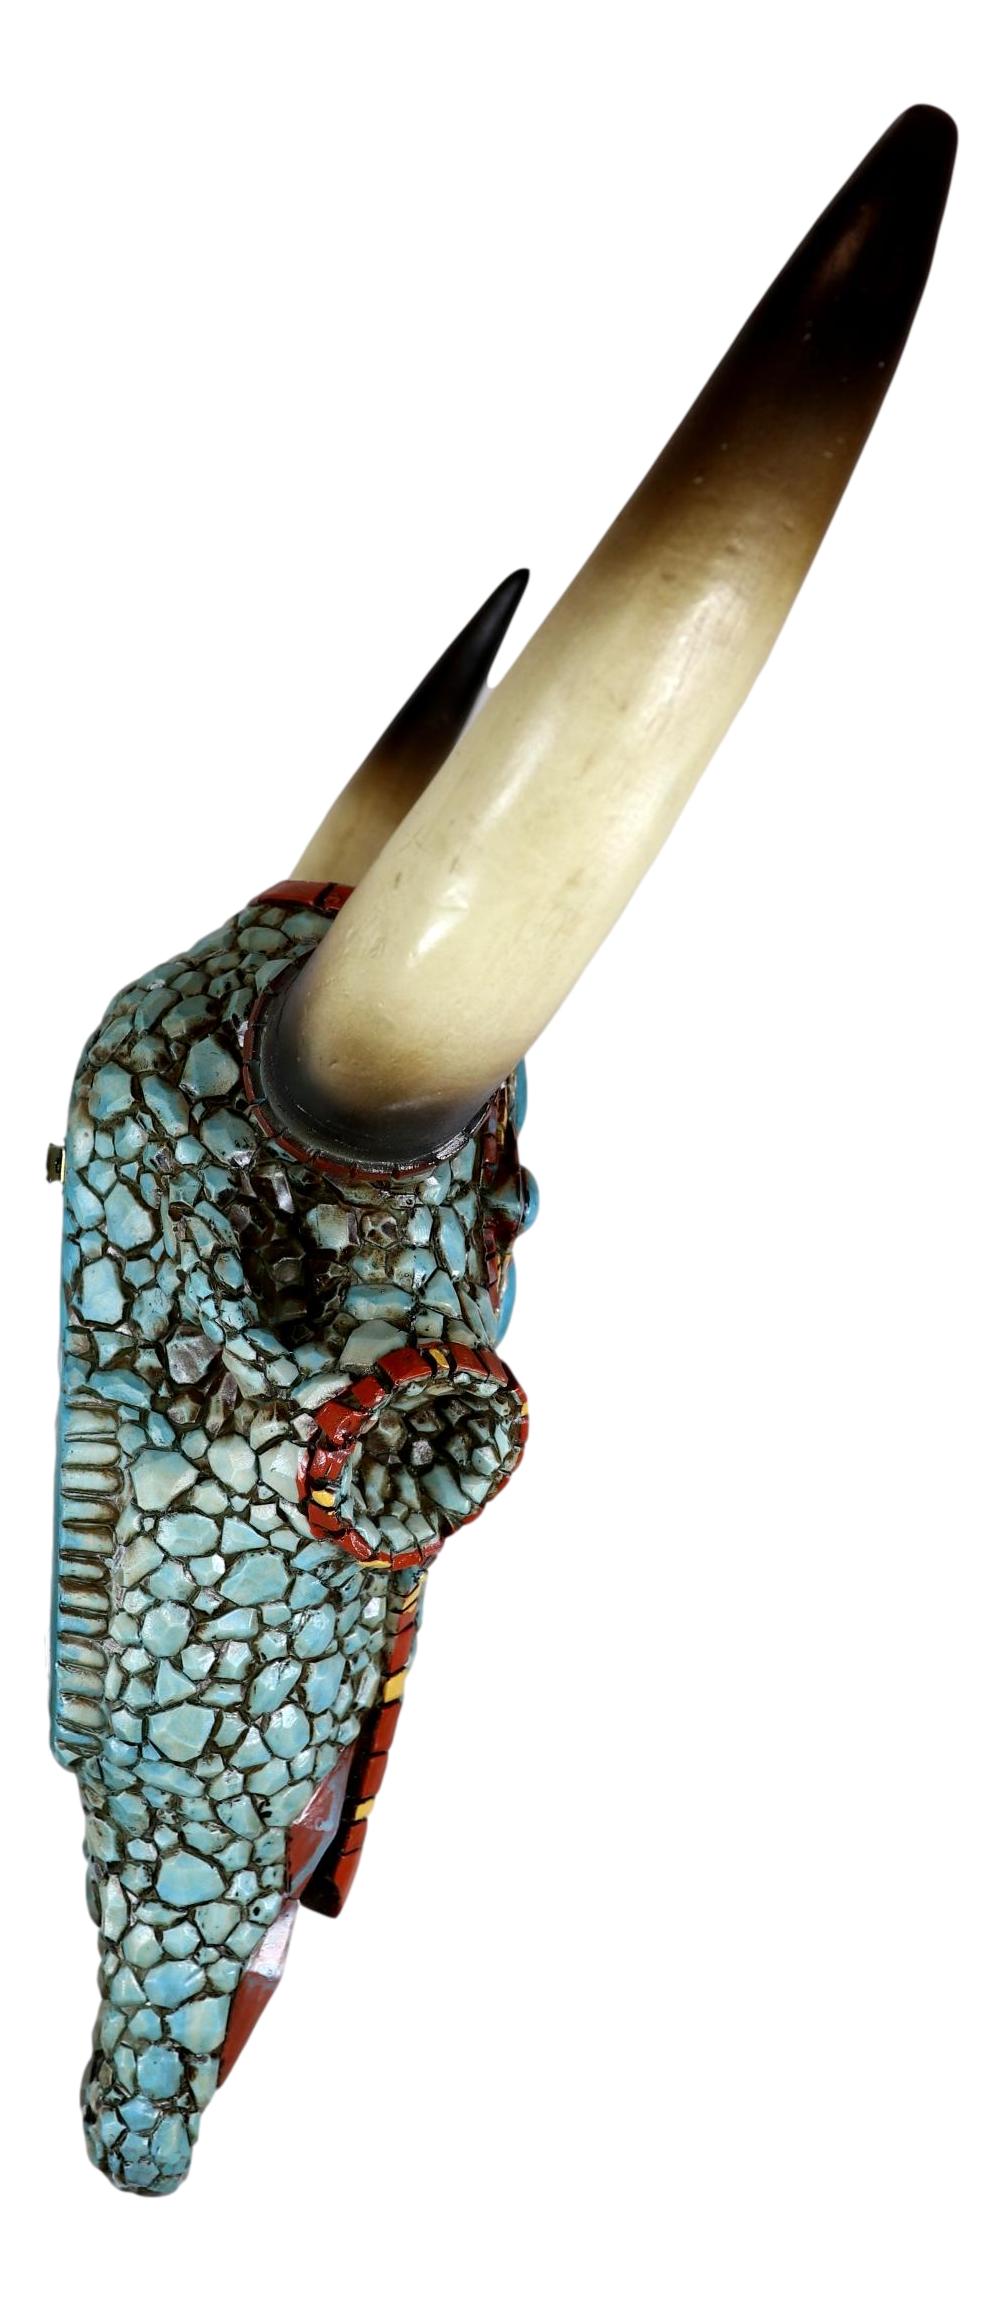 Large Western Steer Cow Skull With Mosaic Turquoise Stones And Beads Wall Decor - image 4 of 6